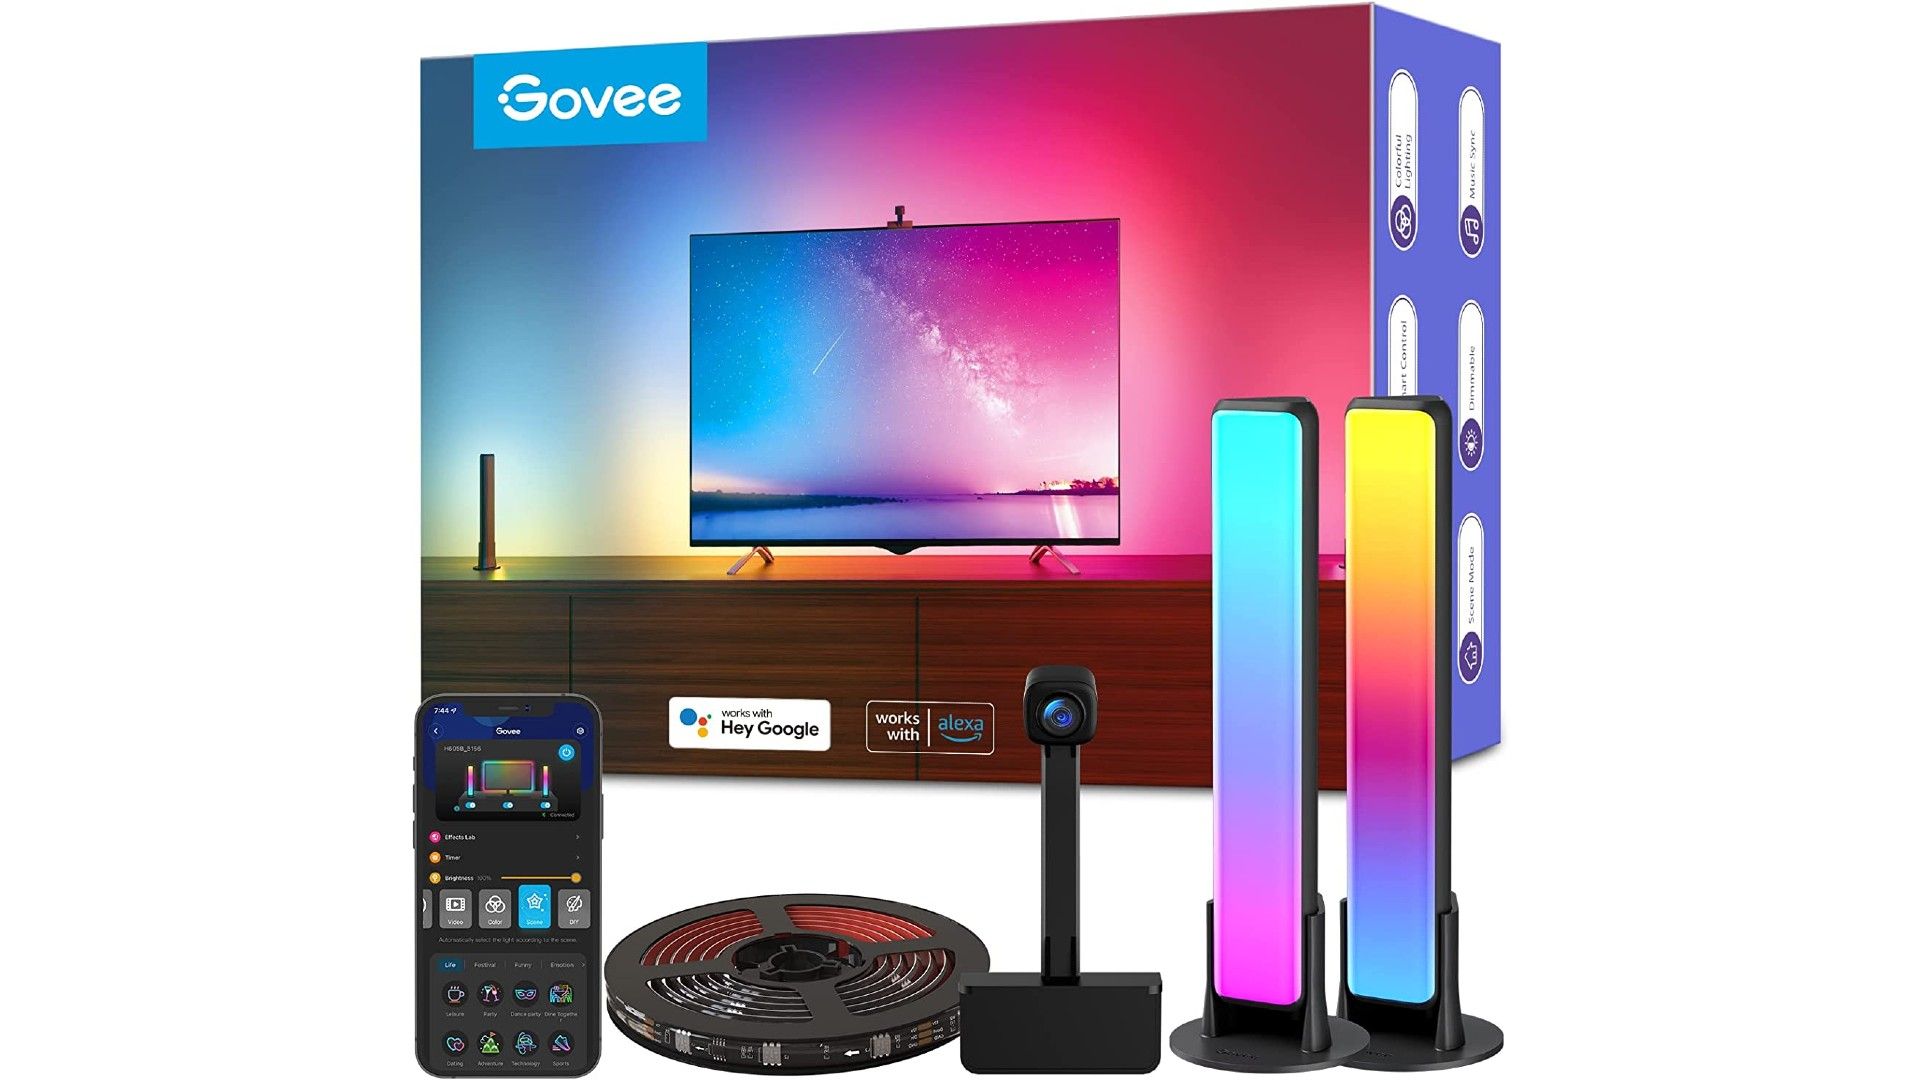 govee-DreamView-T1-Pro-TV-backlight